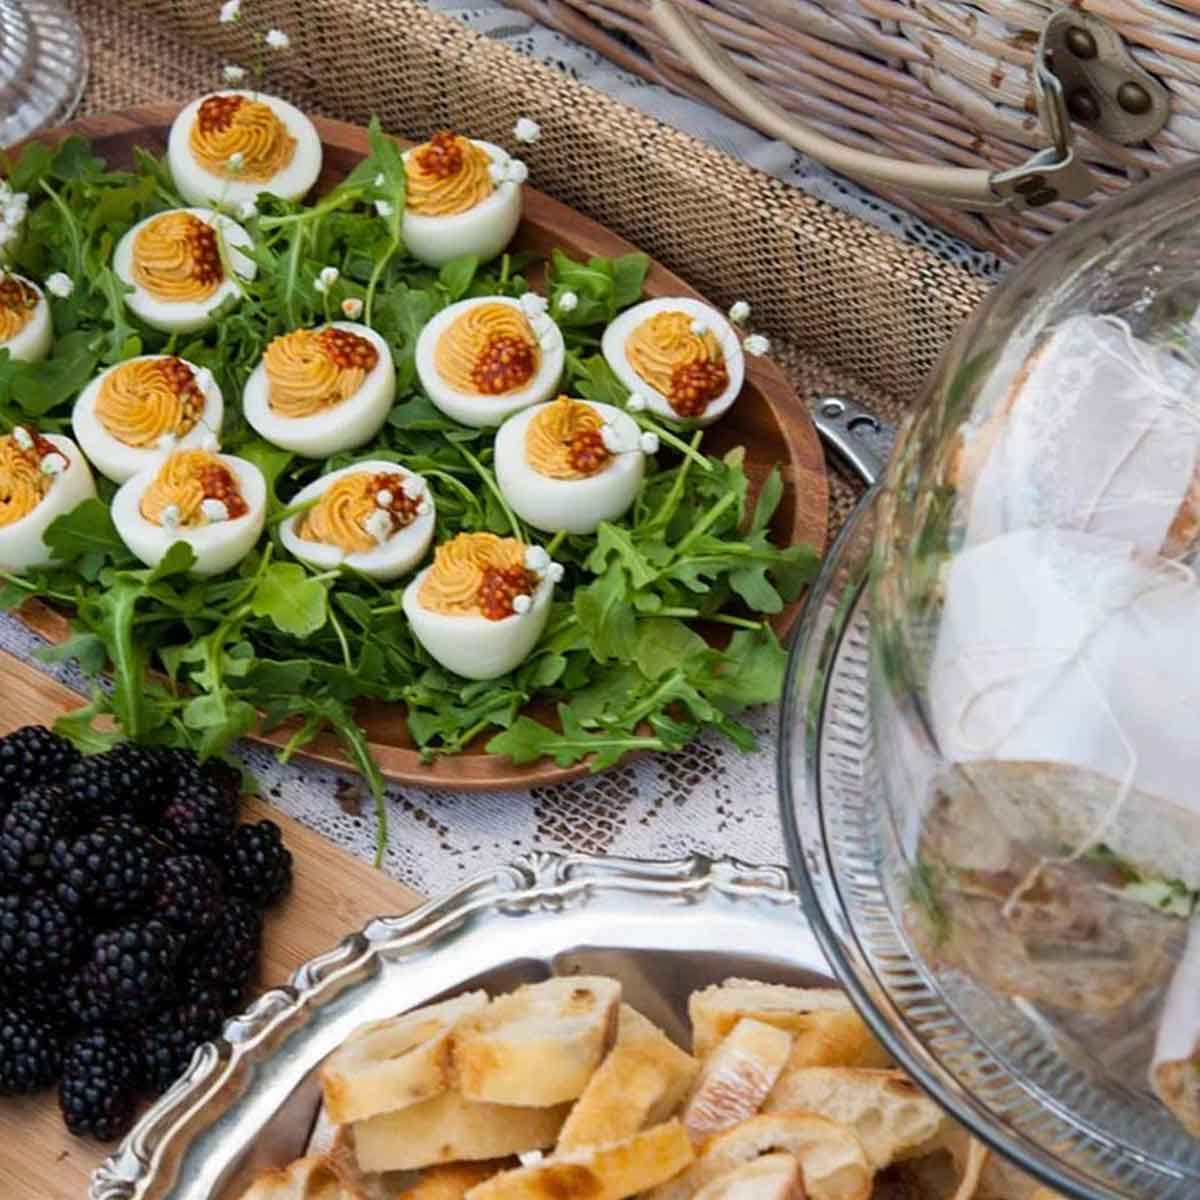 A picnic spread of fresh cut baguette, a plate of deviled eggs and sandwiches on a platter beside a picnic basket.